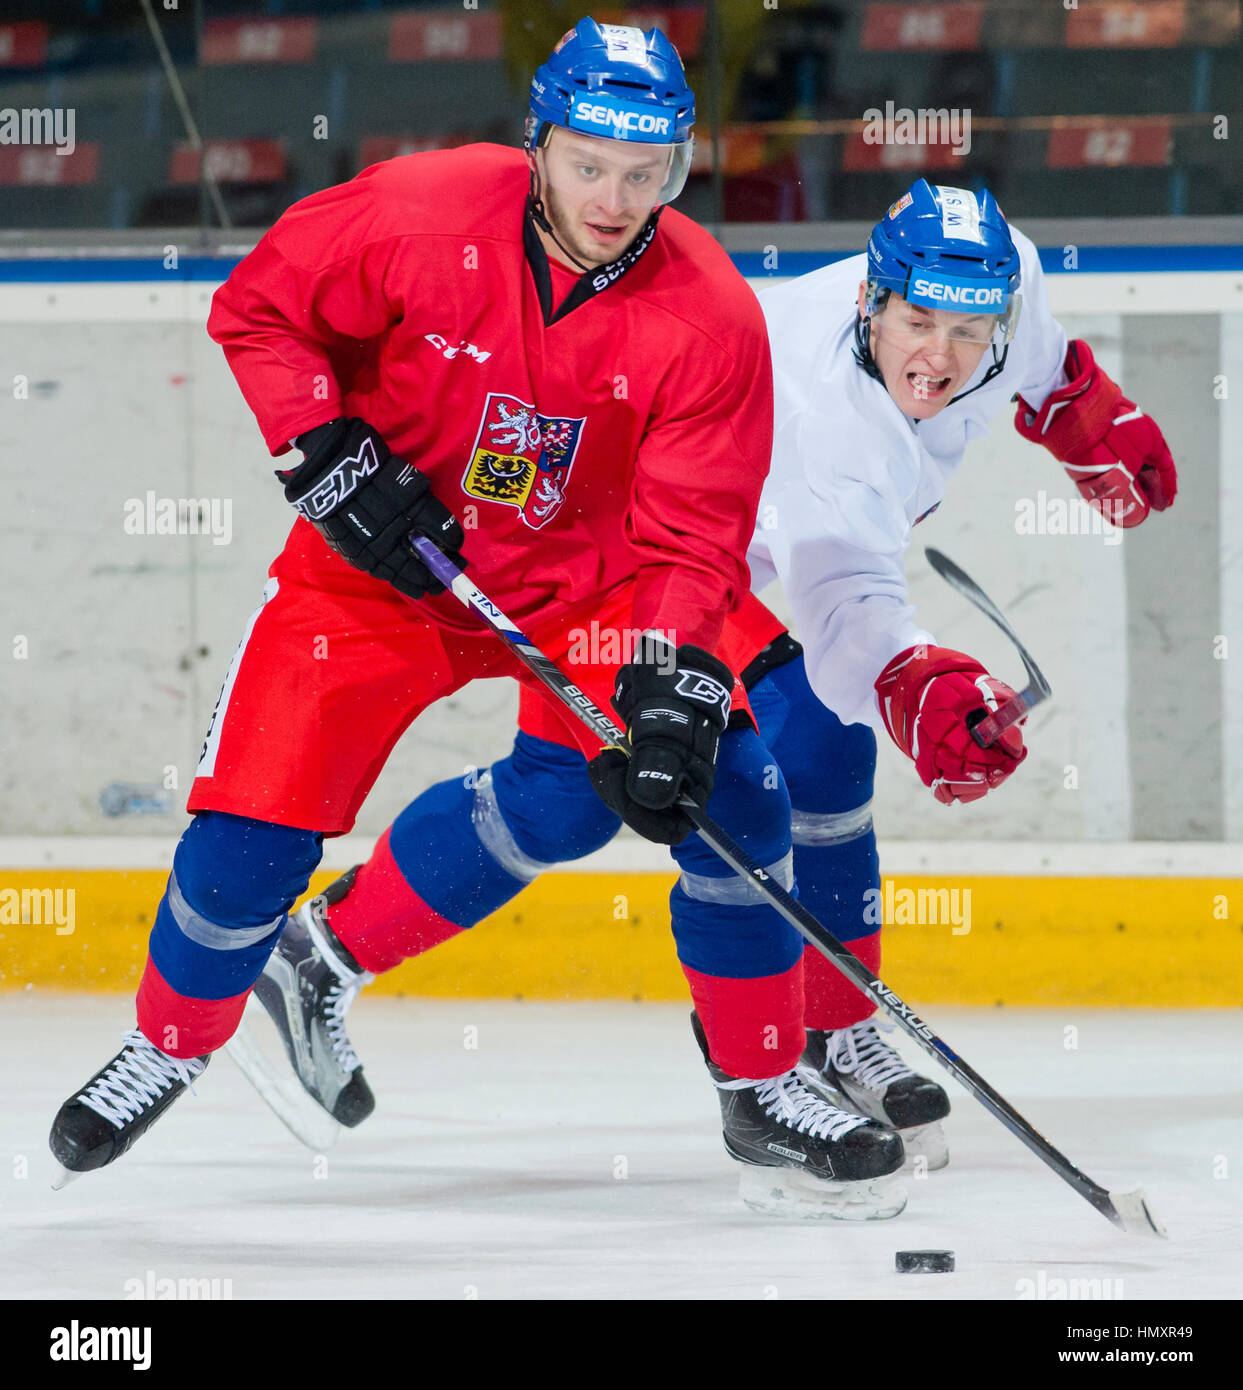 Prague, Czech Republic. 07th Feb, 2017. The Czech national ice-hockey team's players Tomas Zohorna (left) and Lukas Radil in action during the training session prior to the February Sweden Games in Gothenburg in Prague, Czech Republic, February 7, 2017. Sweden Games, the third part of the European Hockey Tour (EHT) series, will take place on February 9-12. Credit: Vit Simanek/CTK Photo/Alamy Live News Stock Photo